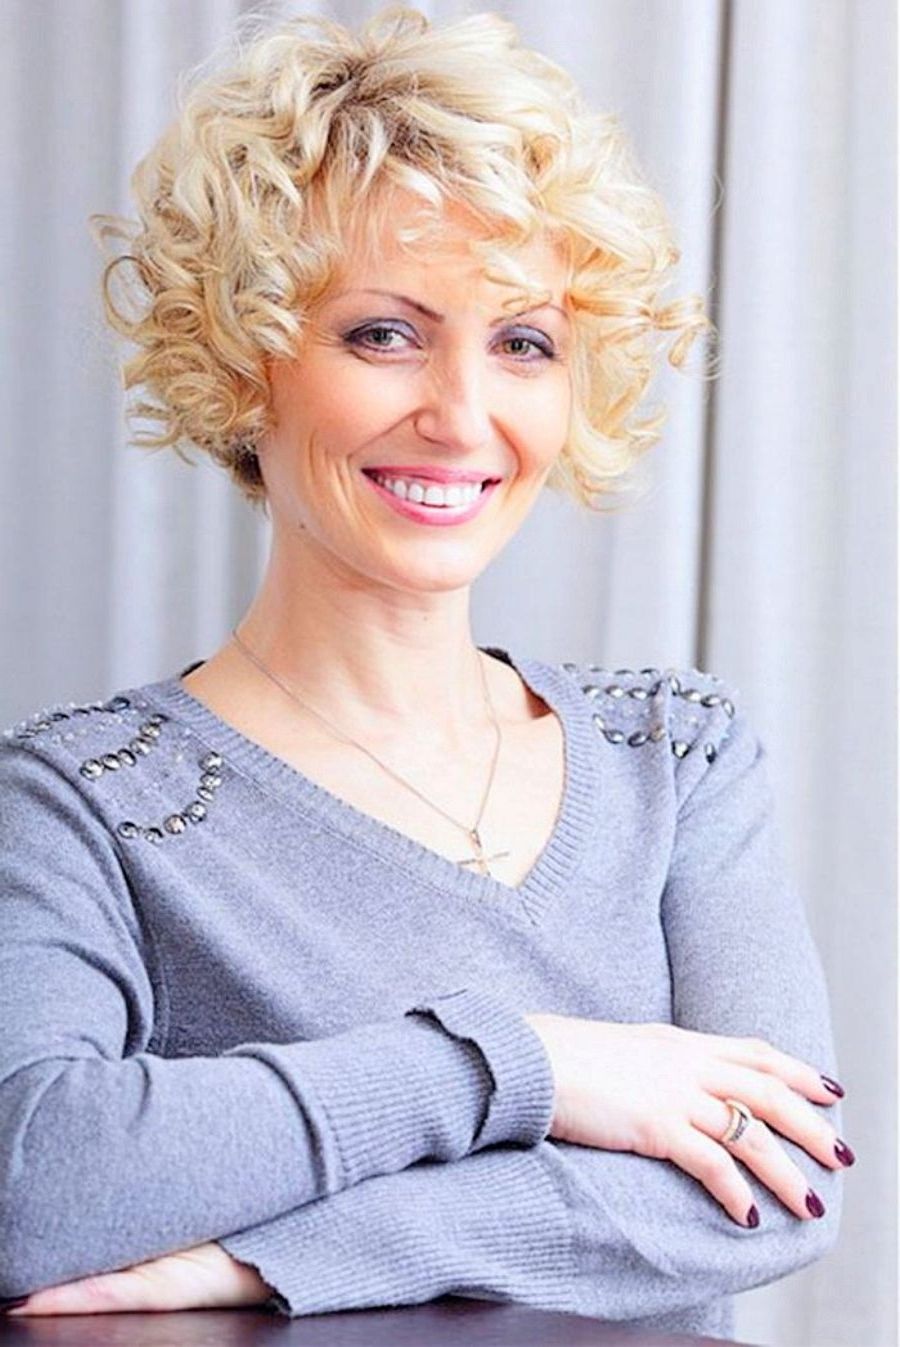 Widely Used Short Shaggy Hairstyles For Curly Hair Regarding Short Curly Haircuts For Older Women Short Haircuts For Curly Hair (View 14 of 15)